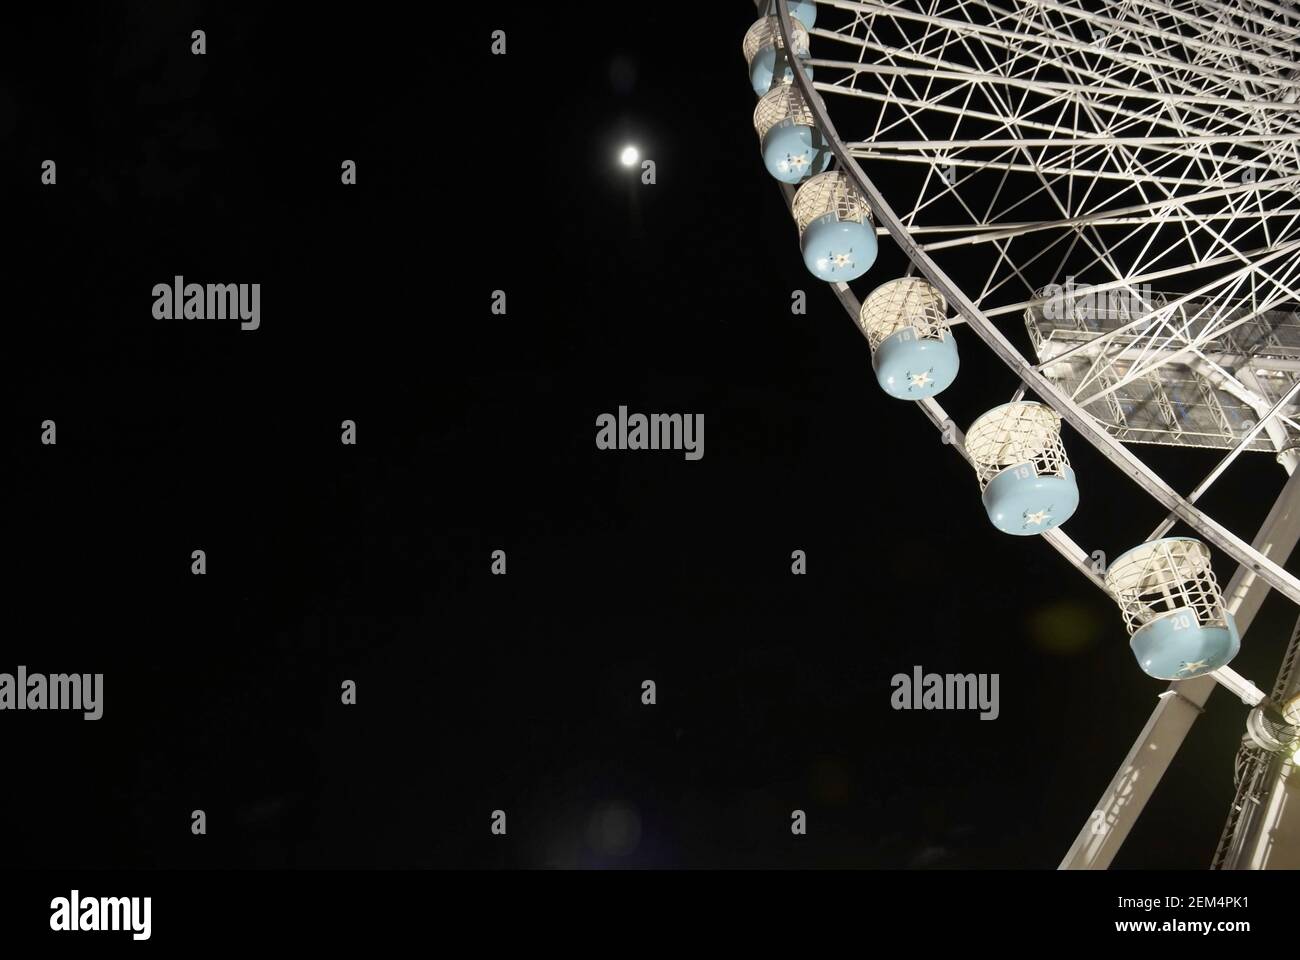 Low angle view of a Ferris wheel Stock Photo